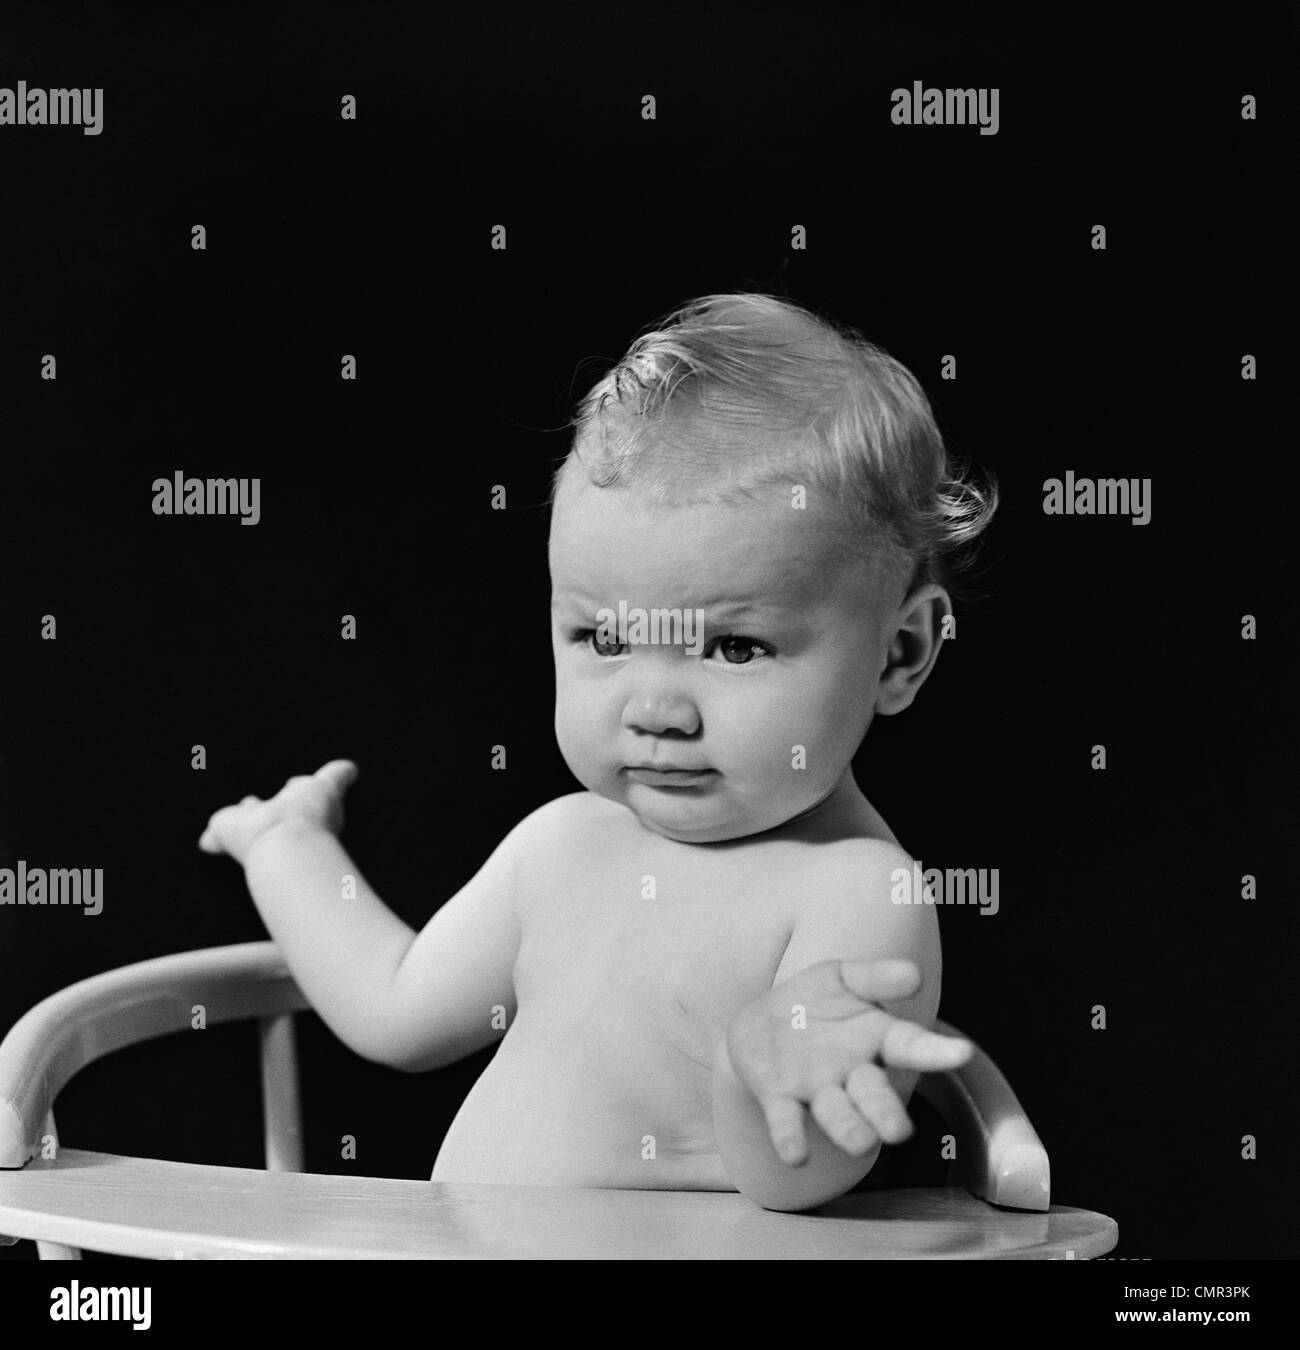 1930s 1940s BABY IN HIGH CHAIR MAKING SHRUGGING GESTURE Stock Photo